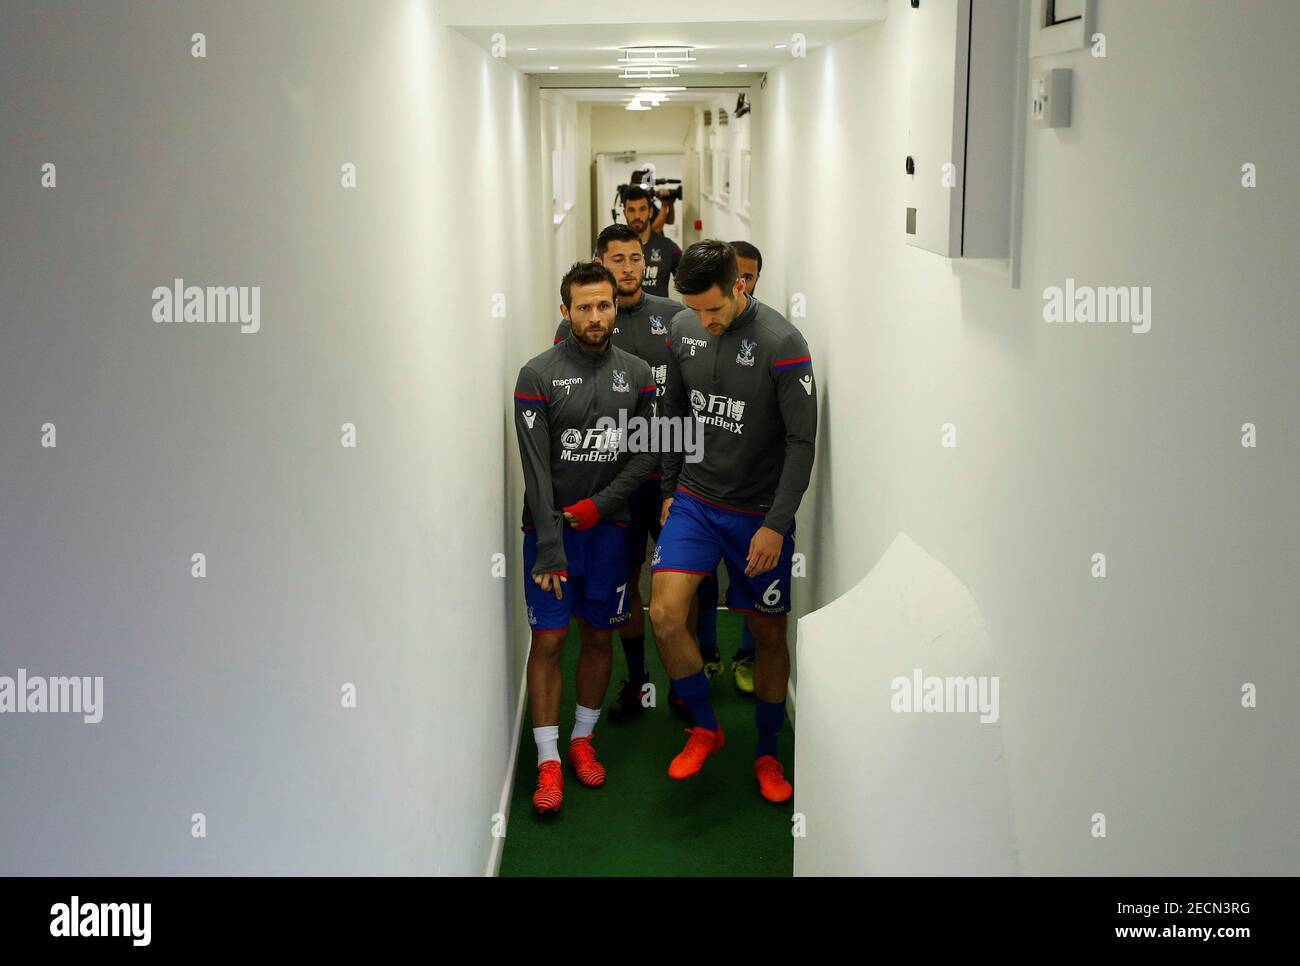 Soccer Football - Premier League - Crystal Palace vs West Ham United - Selhurst Park, London, Britain - October 28, 2017   Crystal Palace's Yohan Cabaye and team mates before the warm up    REUTERS/Eddie Keogh    EDITORIAL USE ONLY. No use with unauthorized audio, video, data, fixture lists, club/league logos or 'live' services. Online in-match use limited to 75 images, no video emulation. No use in betting, games or single club/league/player publications. Please contact your account representative for further details.? Stock Photo